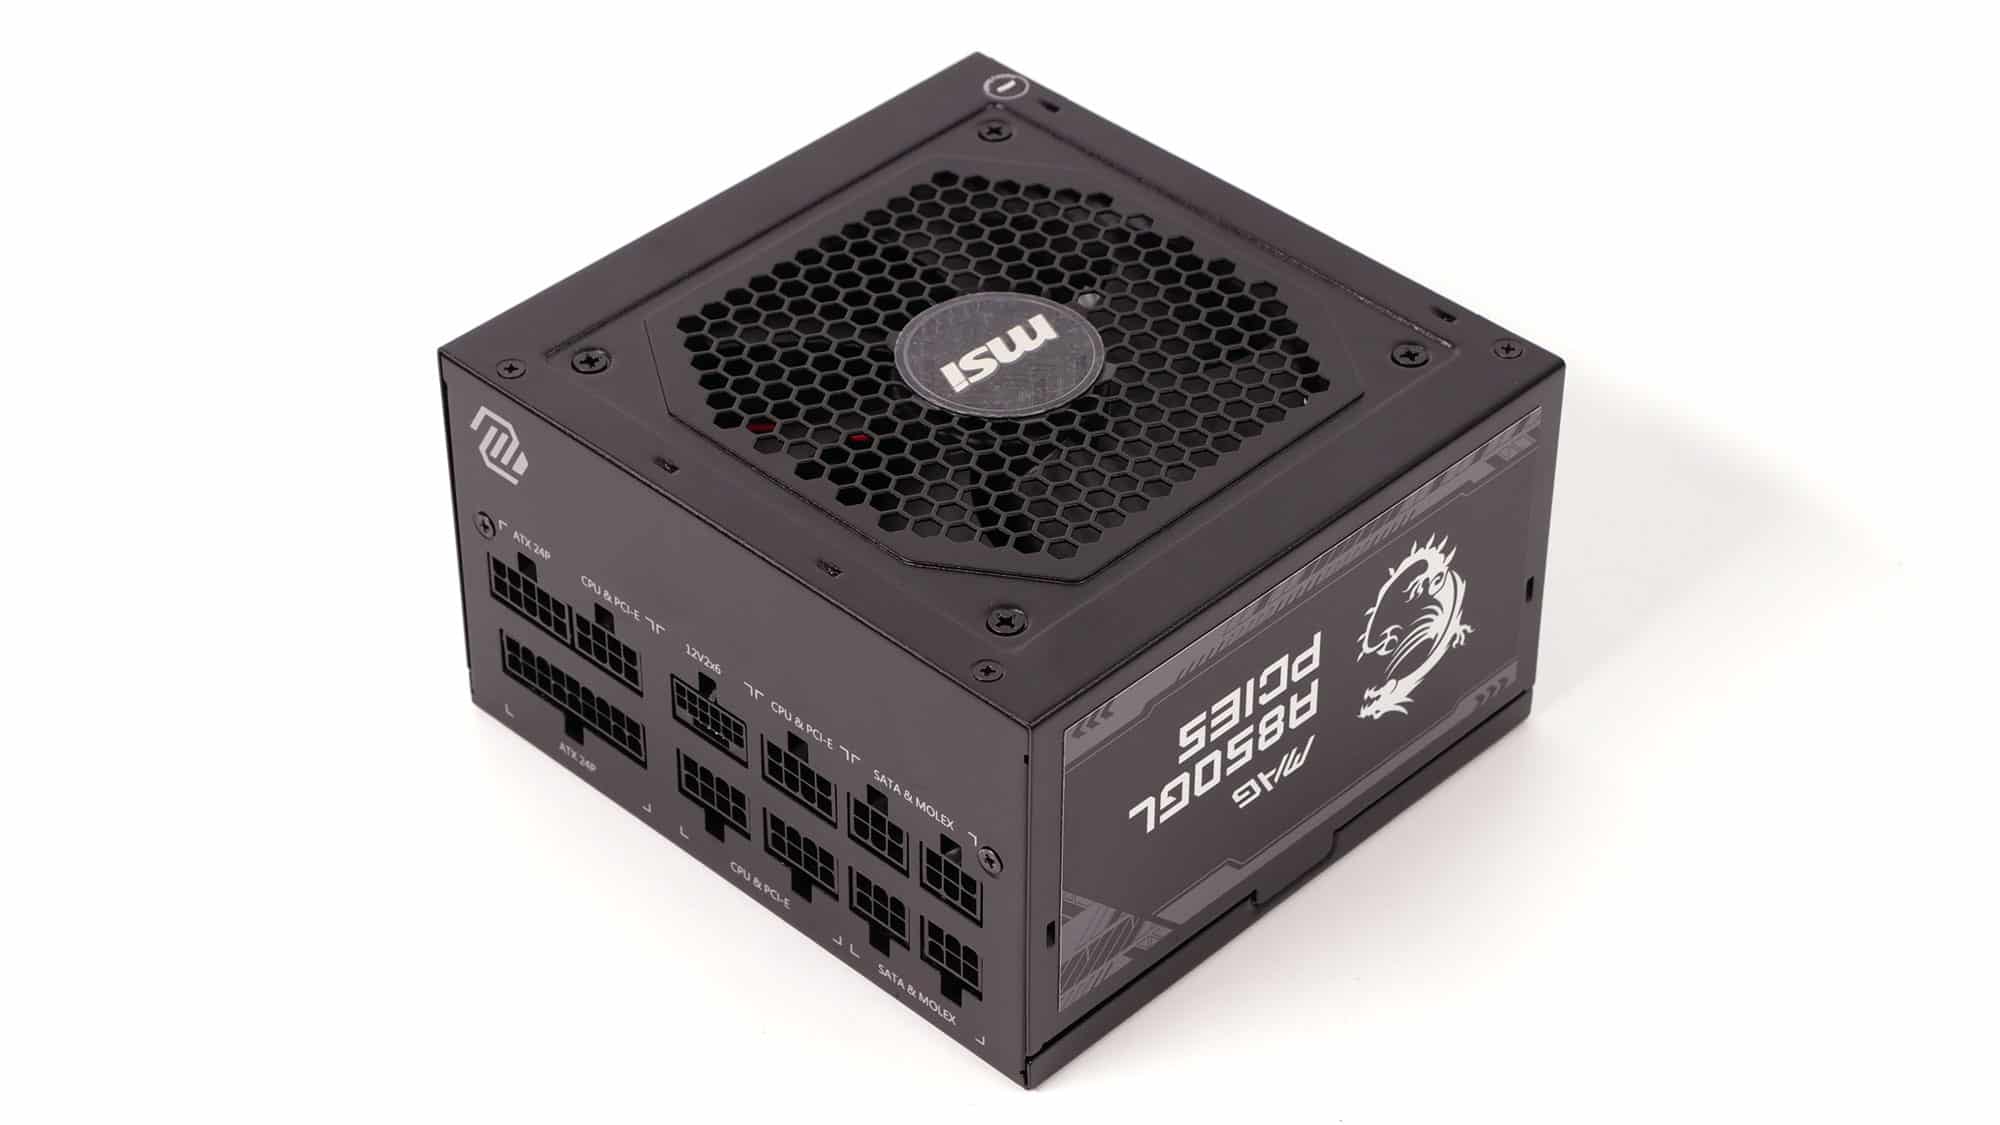 MSI A850G PCIE5 80 GOLD POWER SUPPLY Price in BD 2023